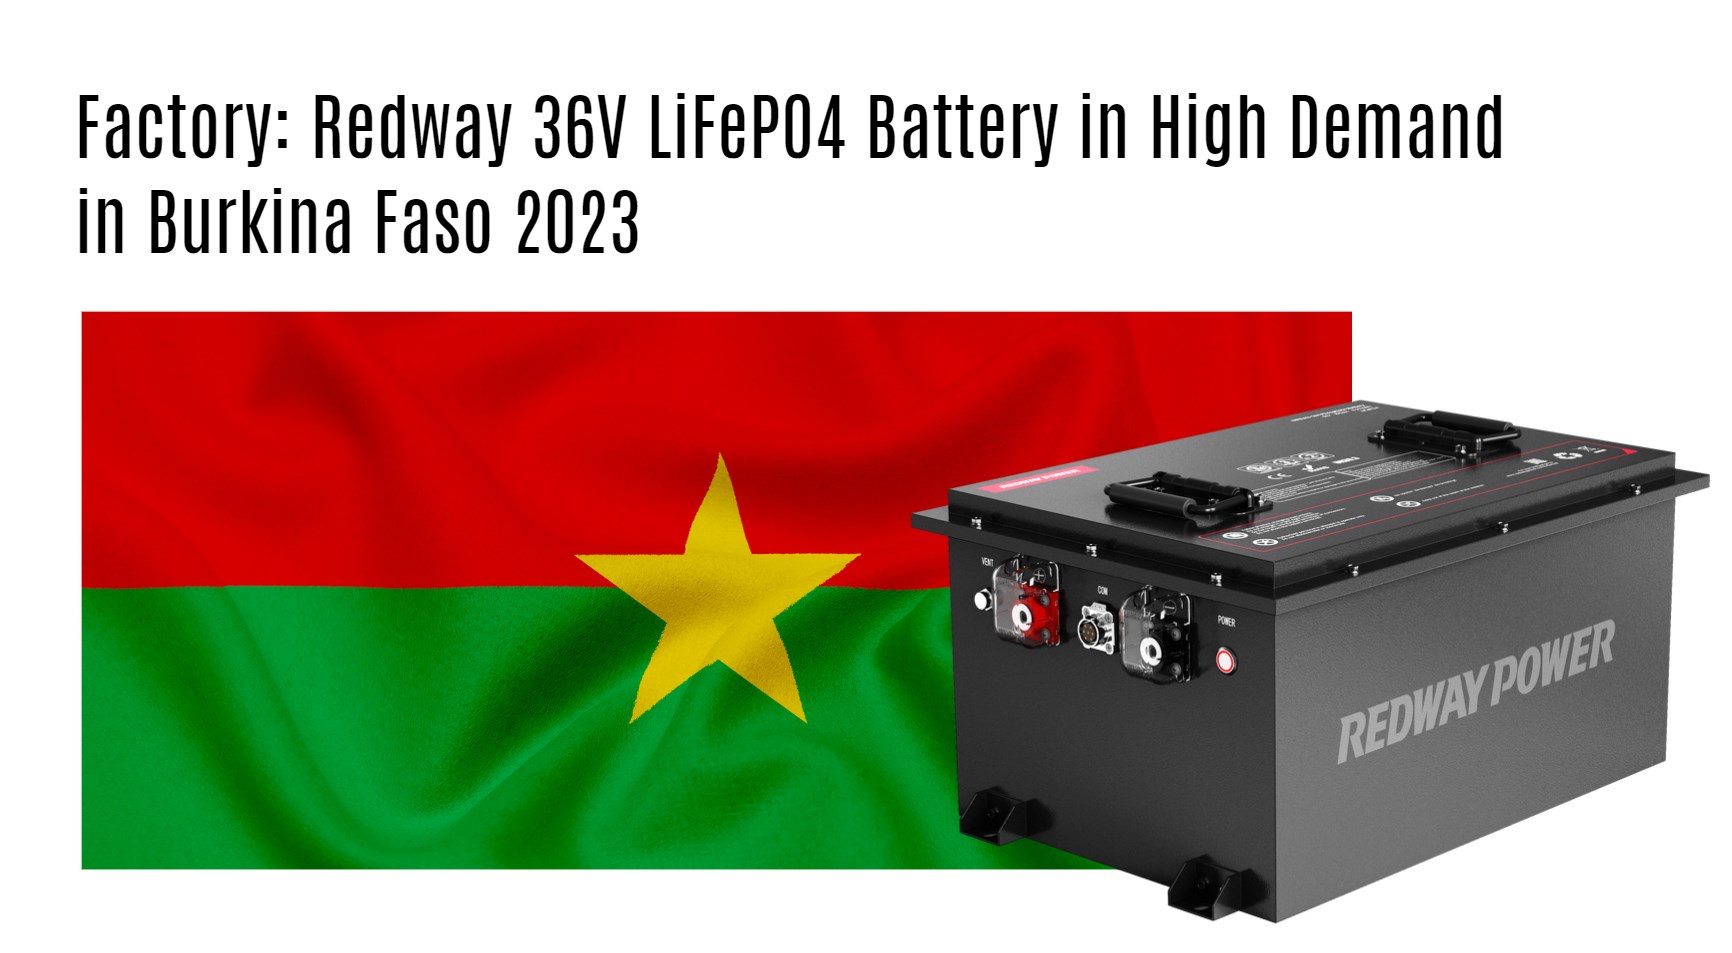 Factory: Redway 36V LiFePO4 Battery in High Demand in Burkina Faso 2023